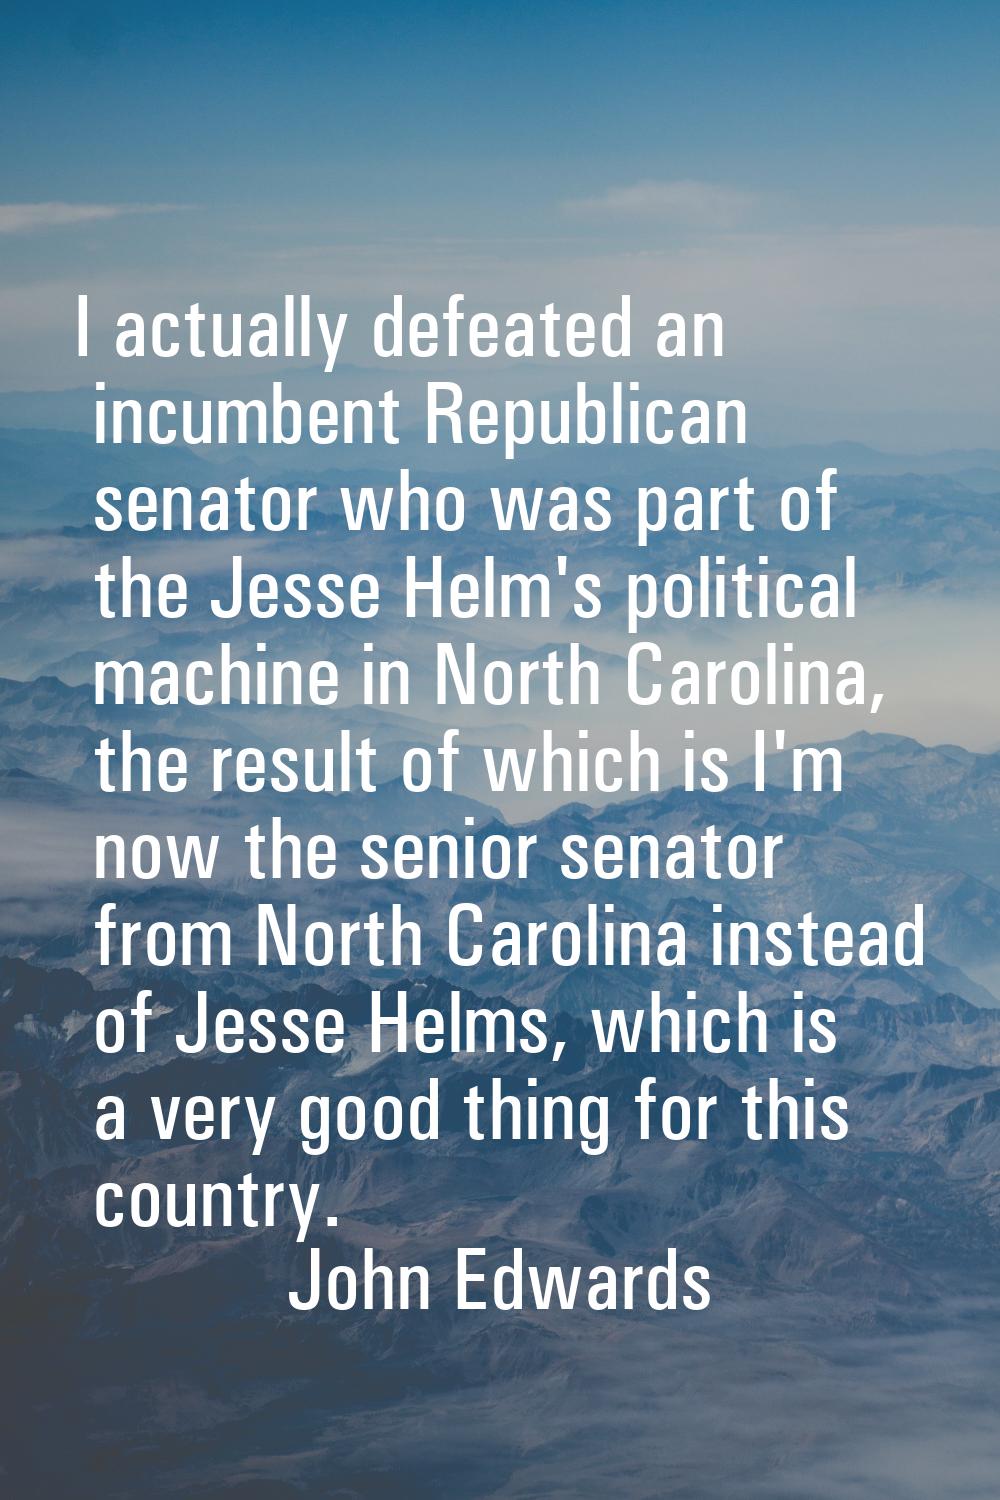 I actually defeated an incumbent Republican senator who was part of the Jesse Helm's political mach